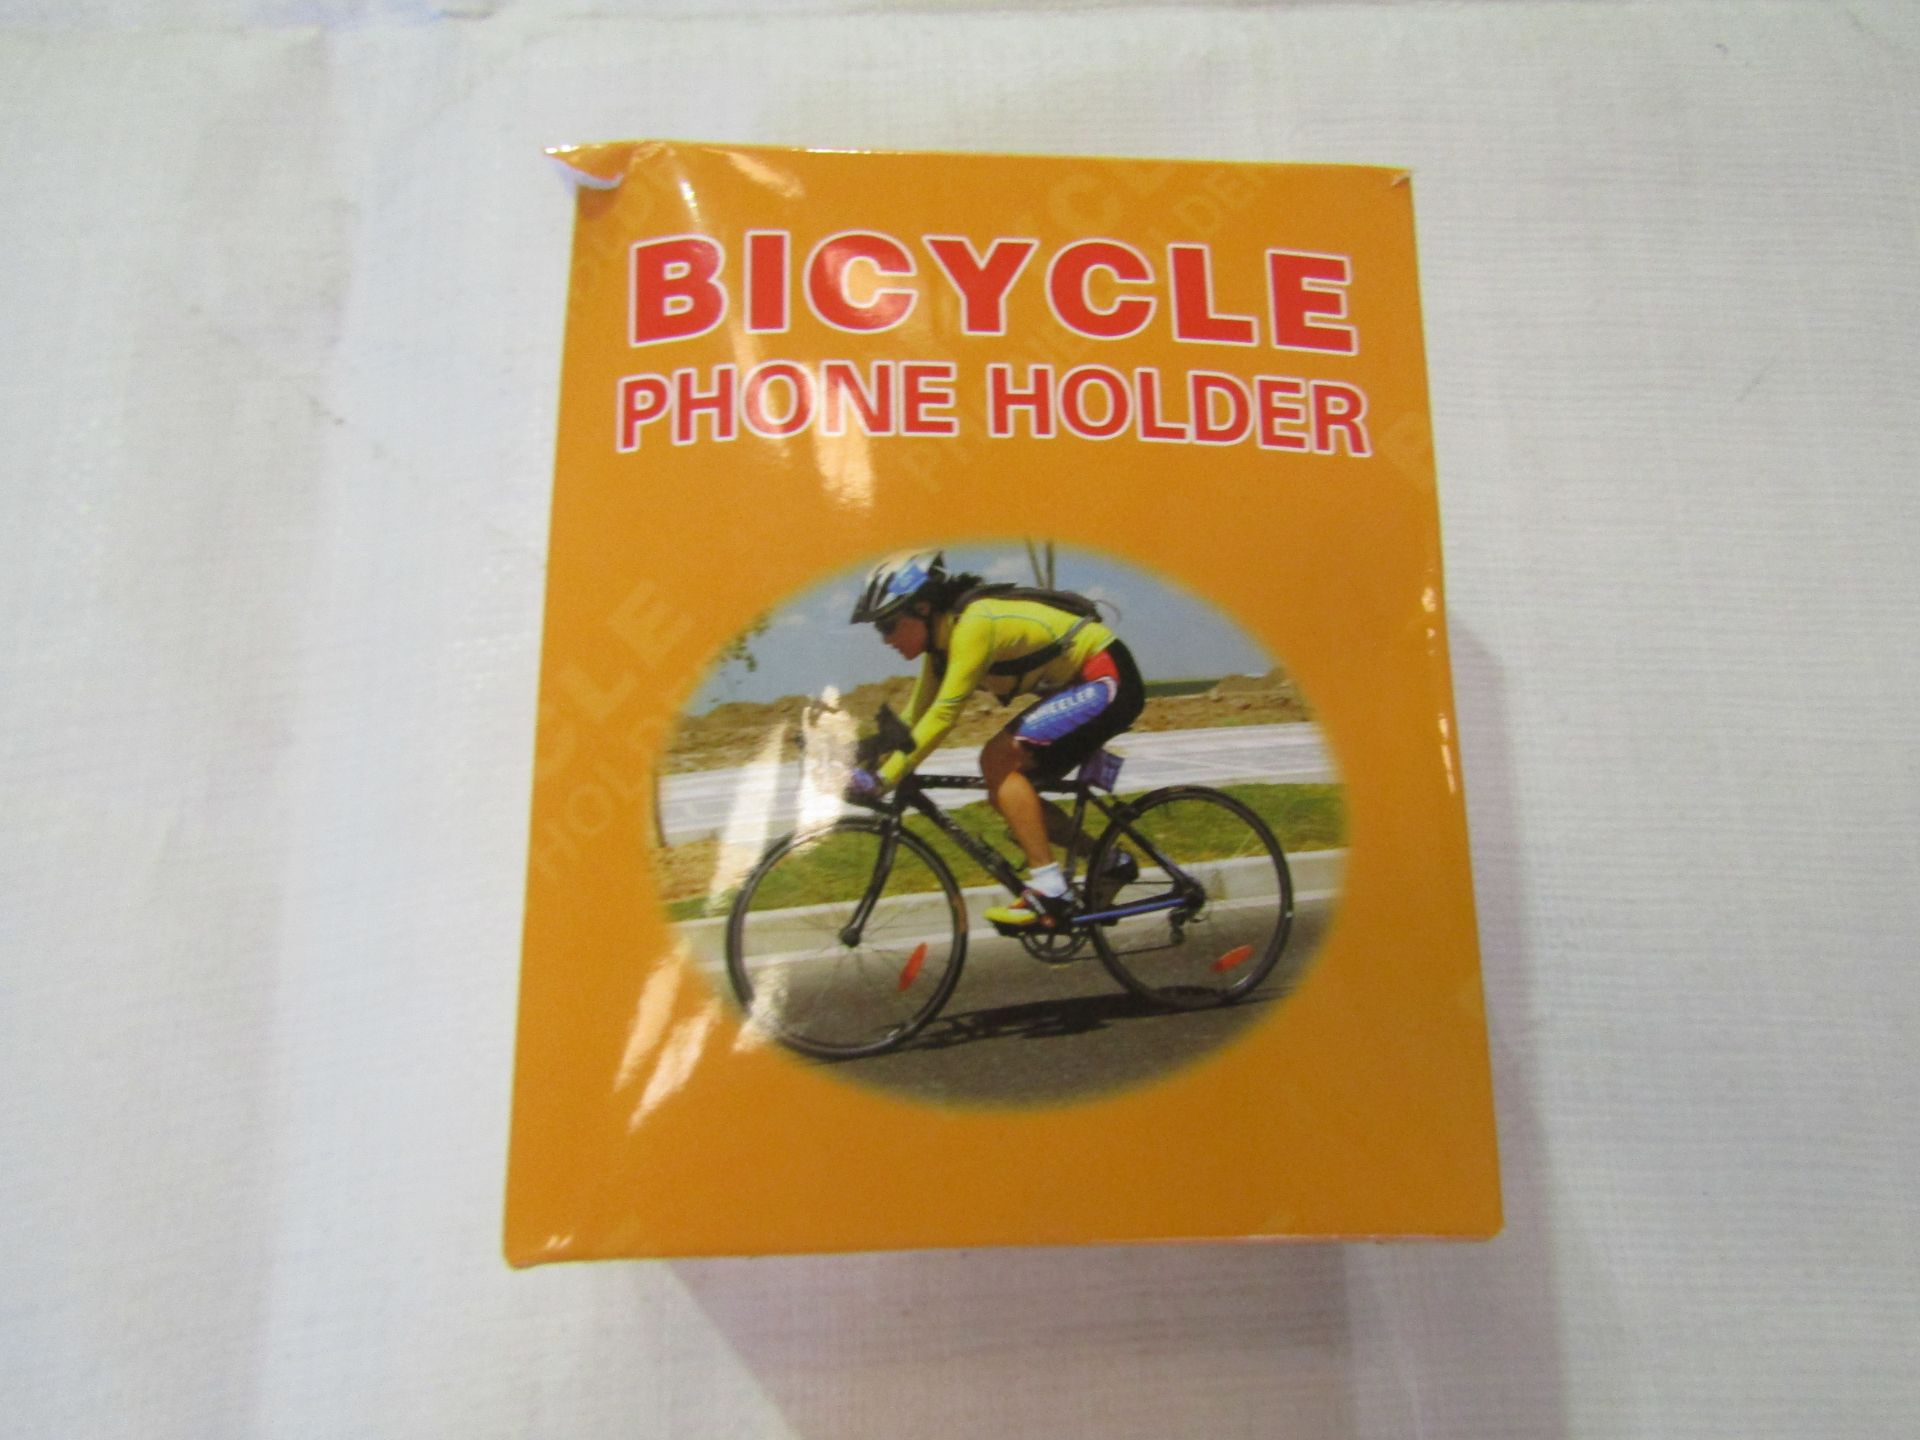 High Quailty Bicycle Phone Holder - Unchecked & boxed.